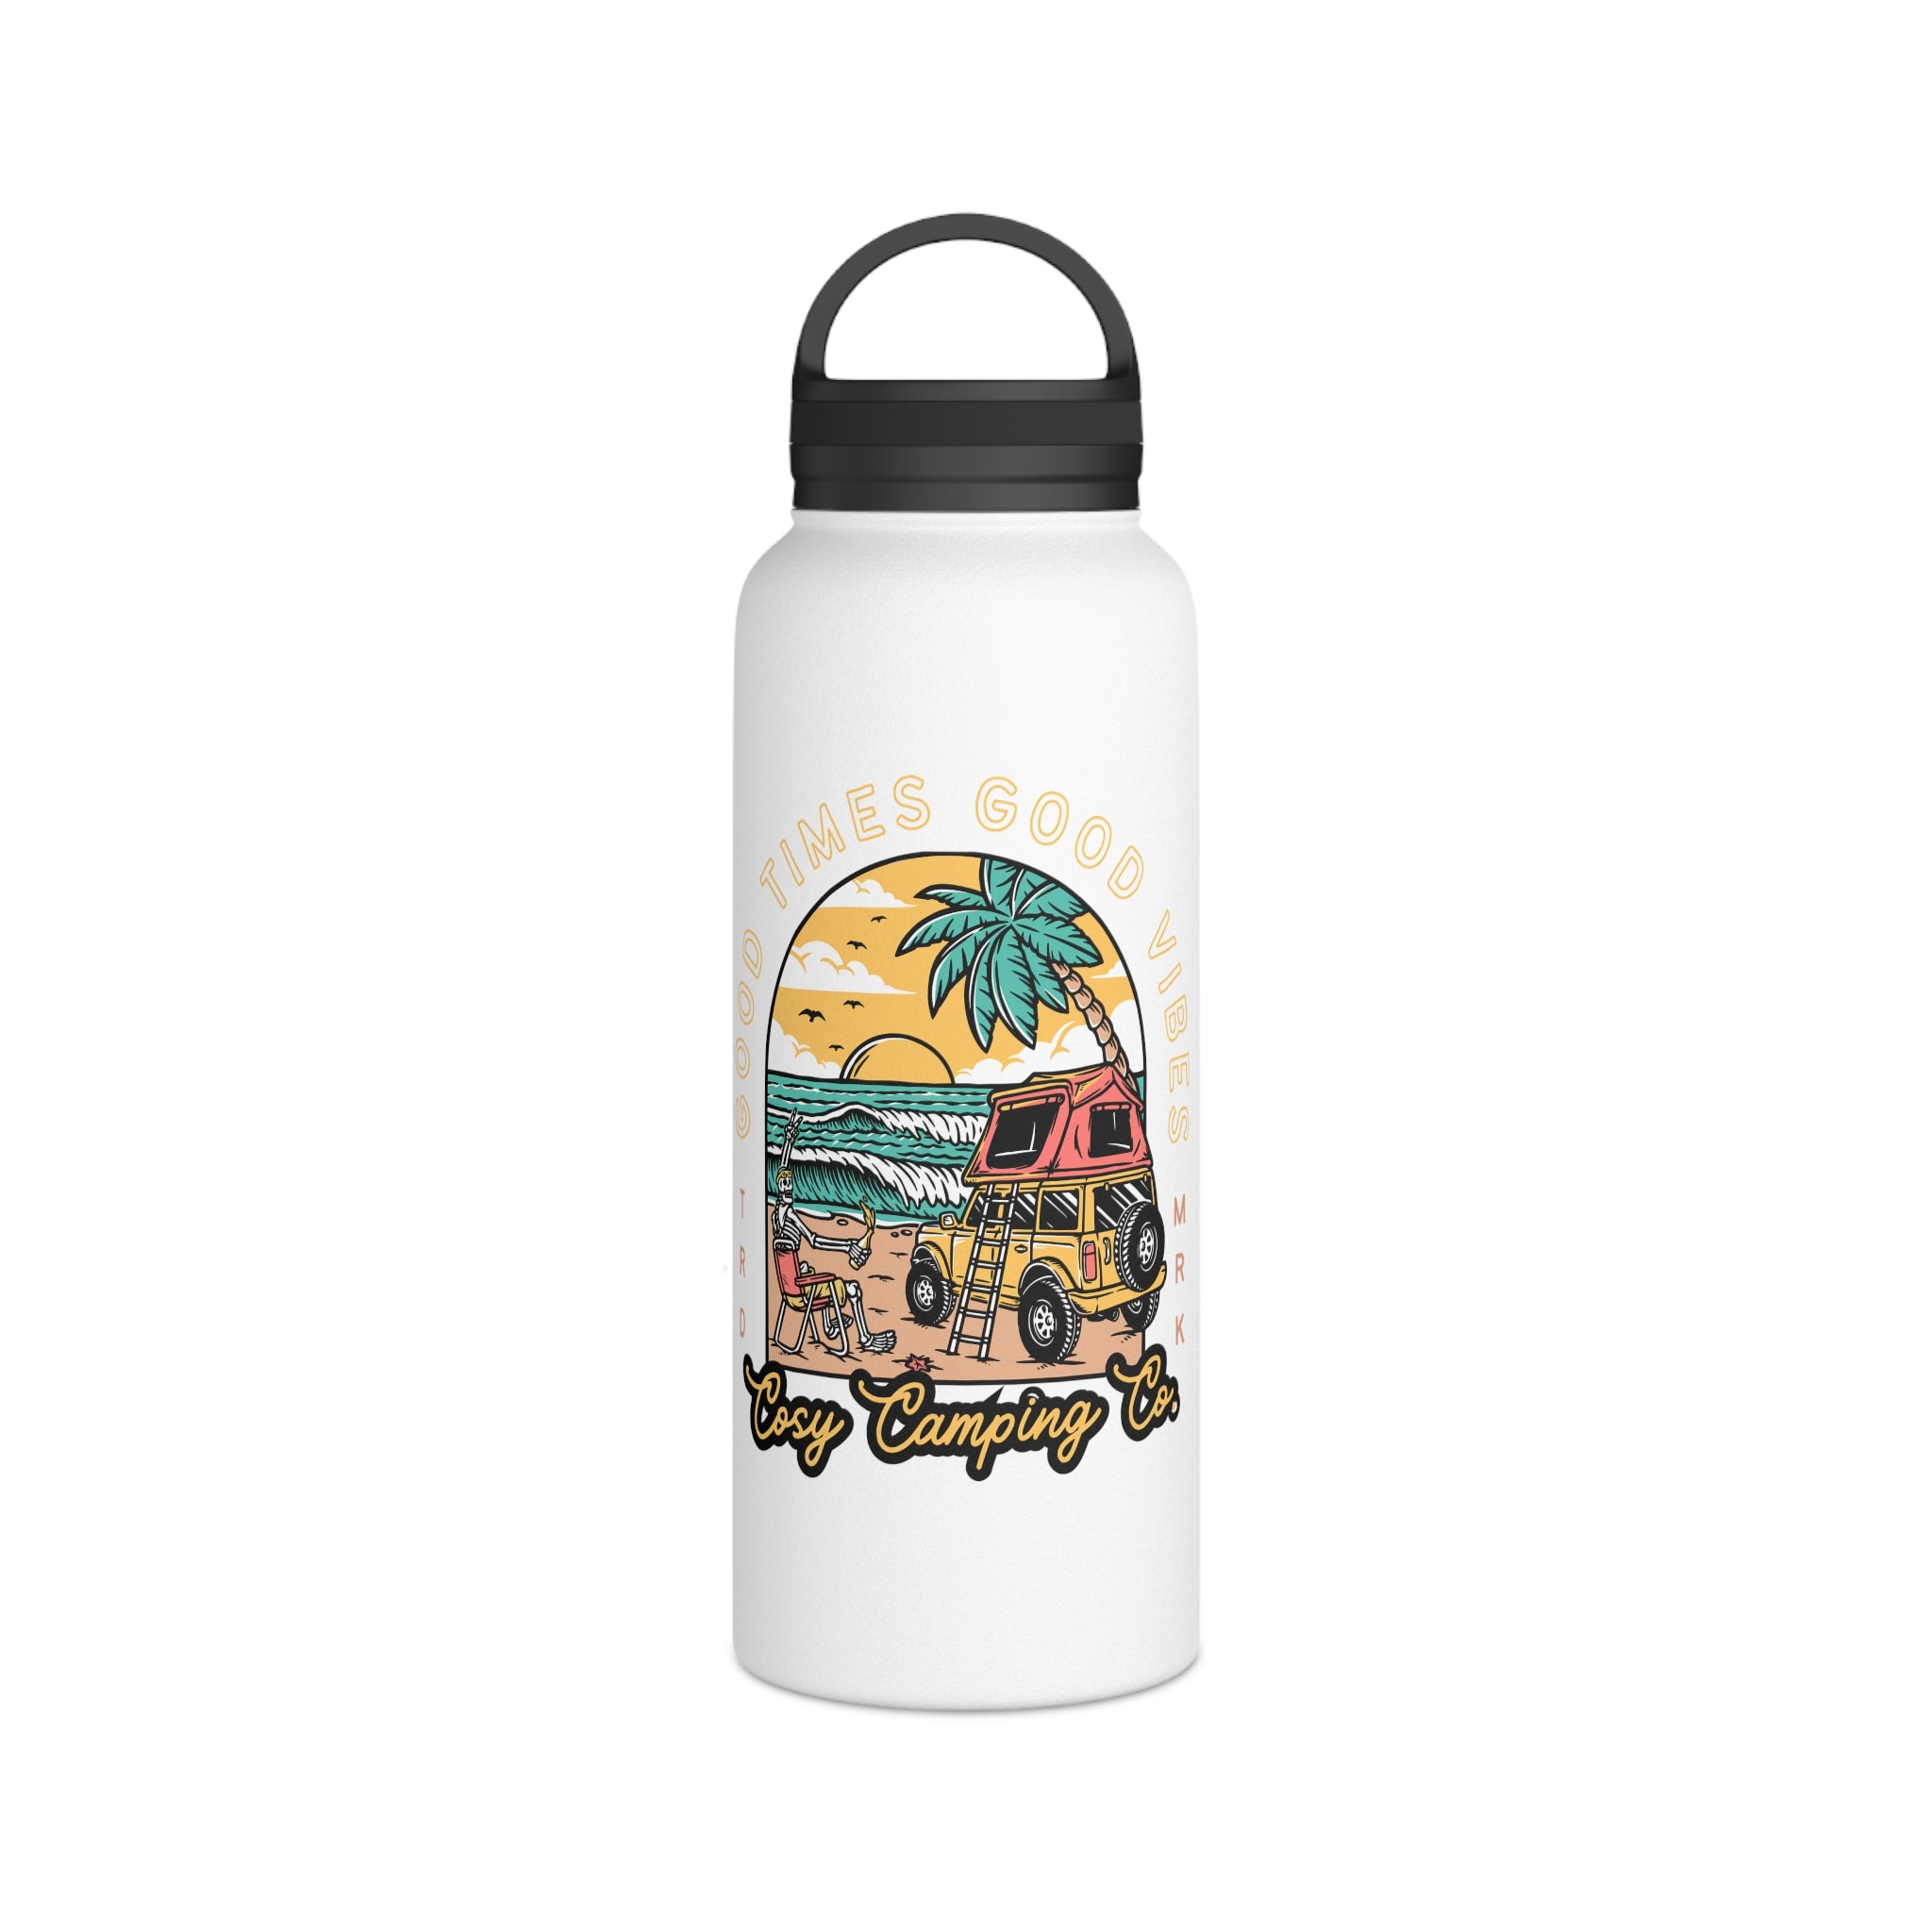 Good Vibes Stainless Steel Water Bottle Mug Cosy Camping Co.   